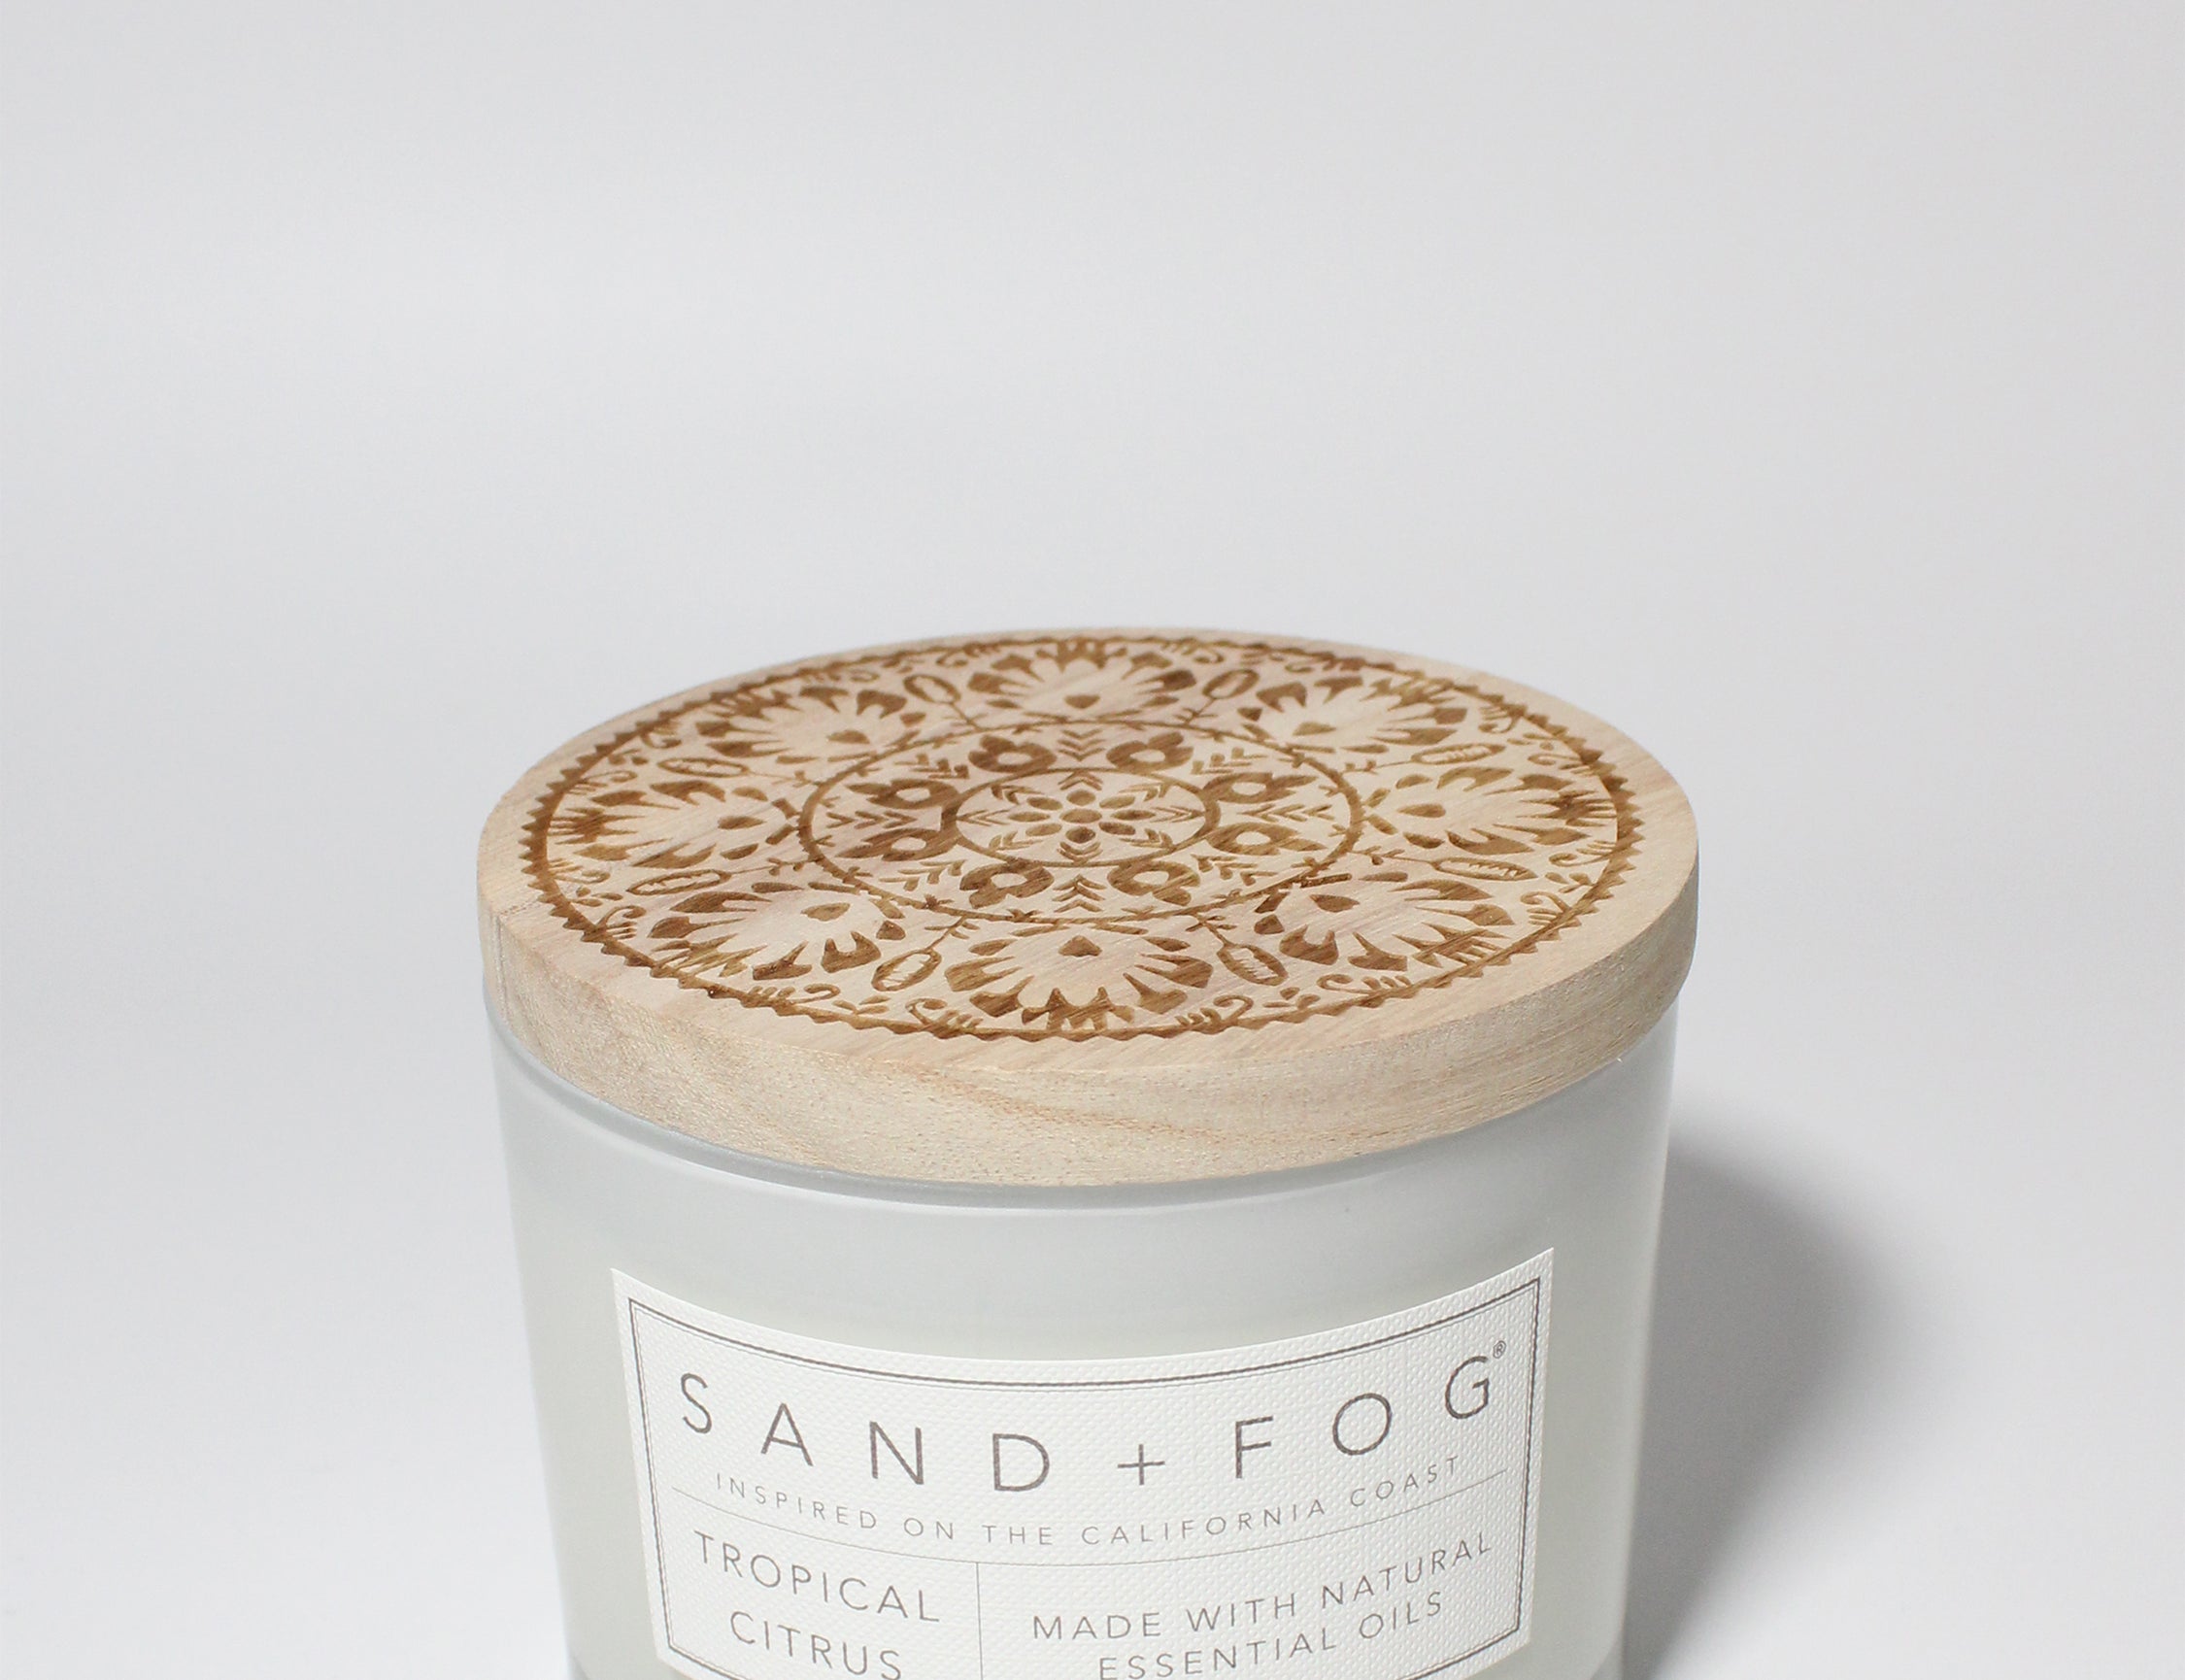 Sand and Fog candle